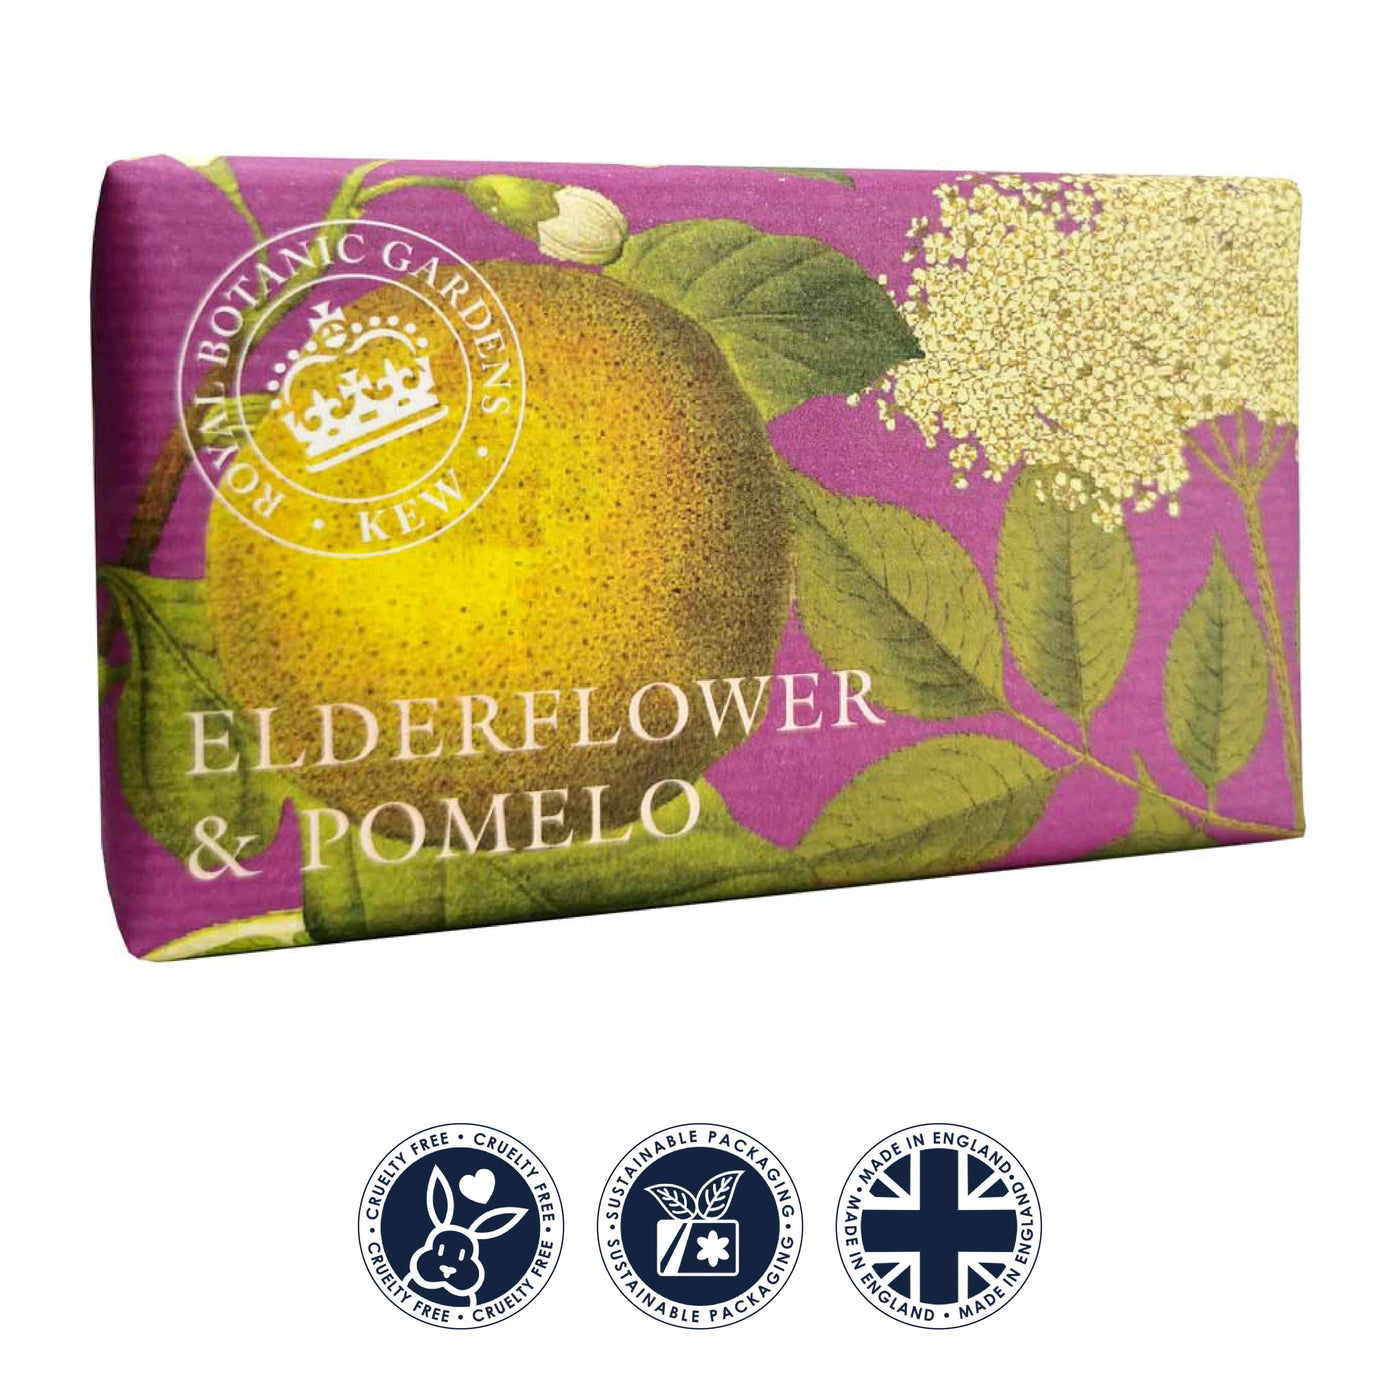 Kew Gardens Elderflower & Pomelo Soap Bar from our Luxury Bar Soap collection by The English Soap Company